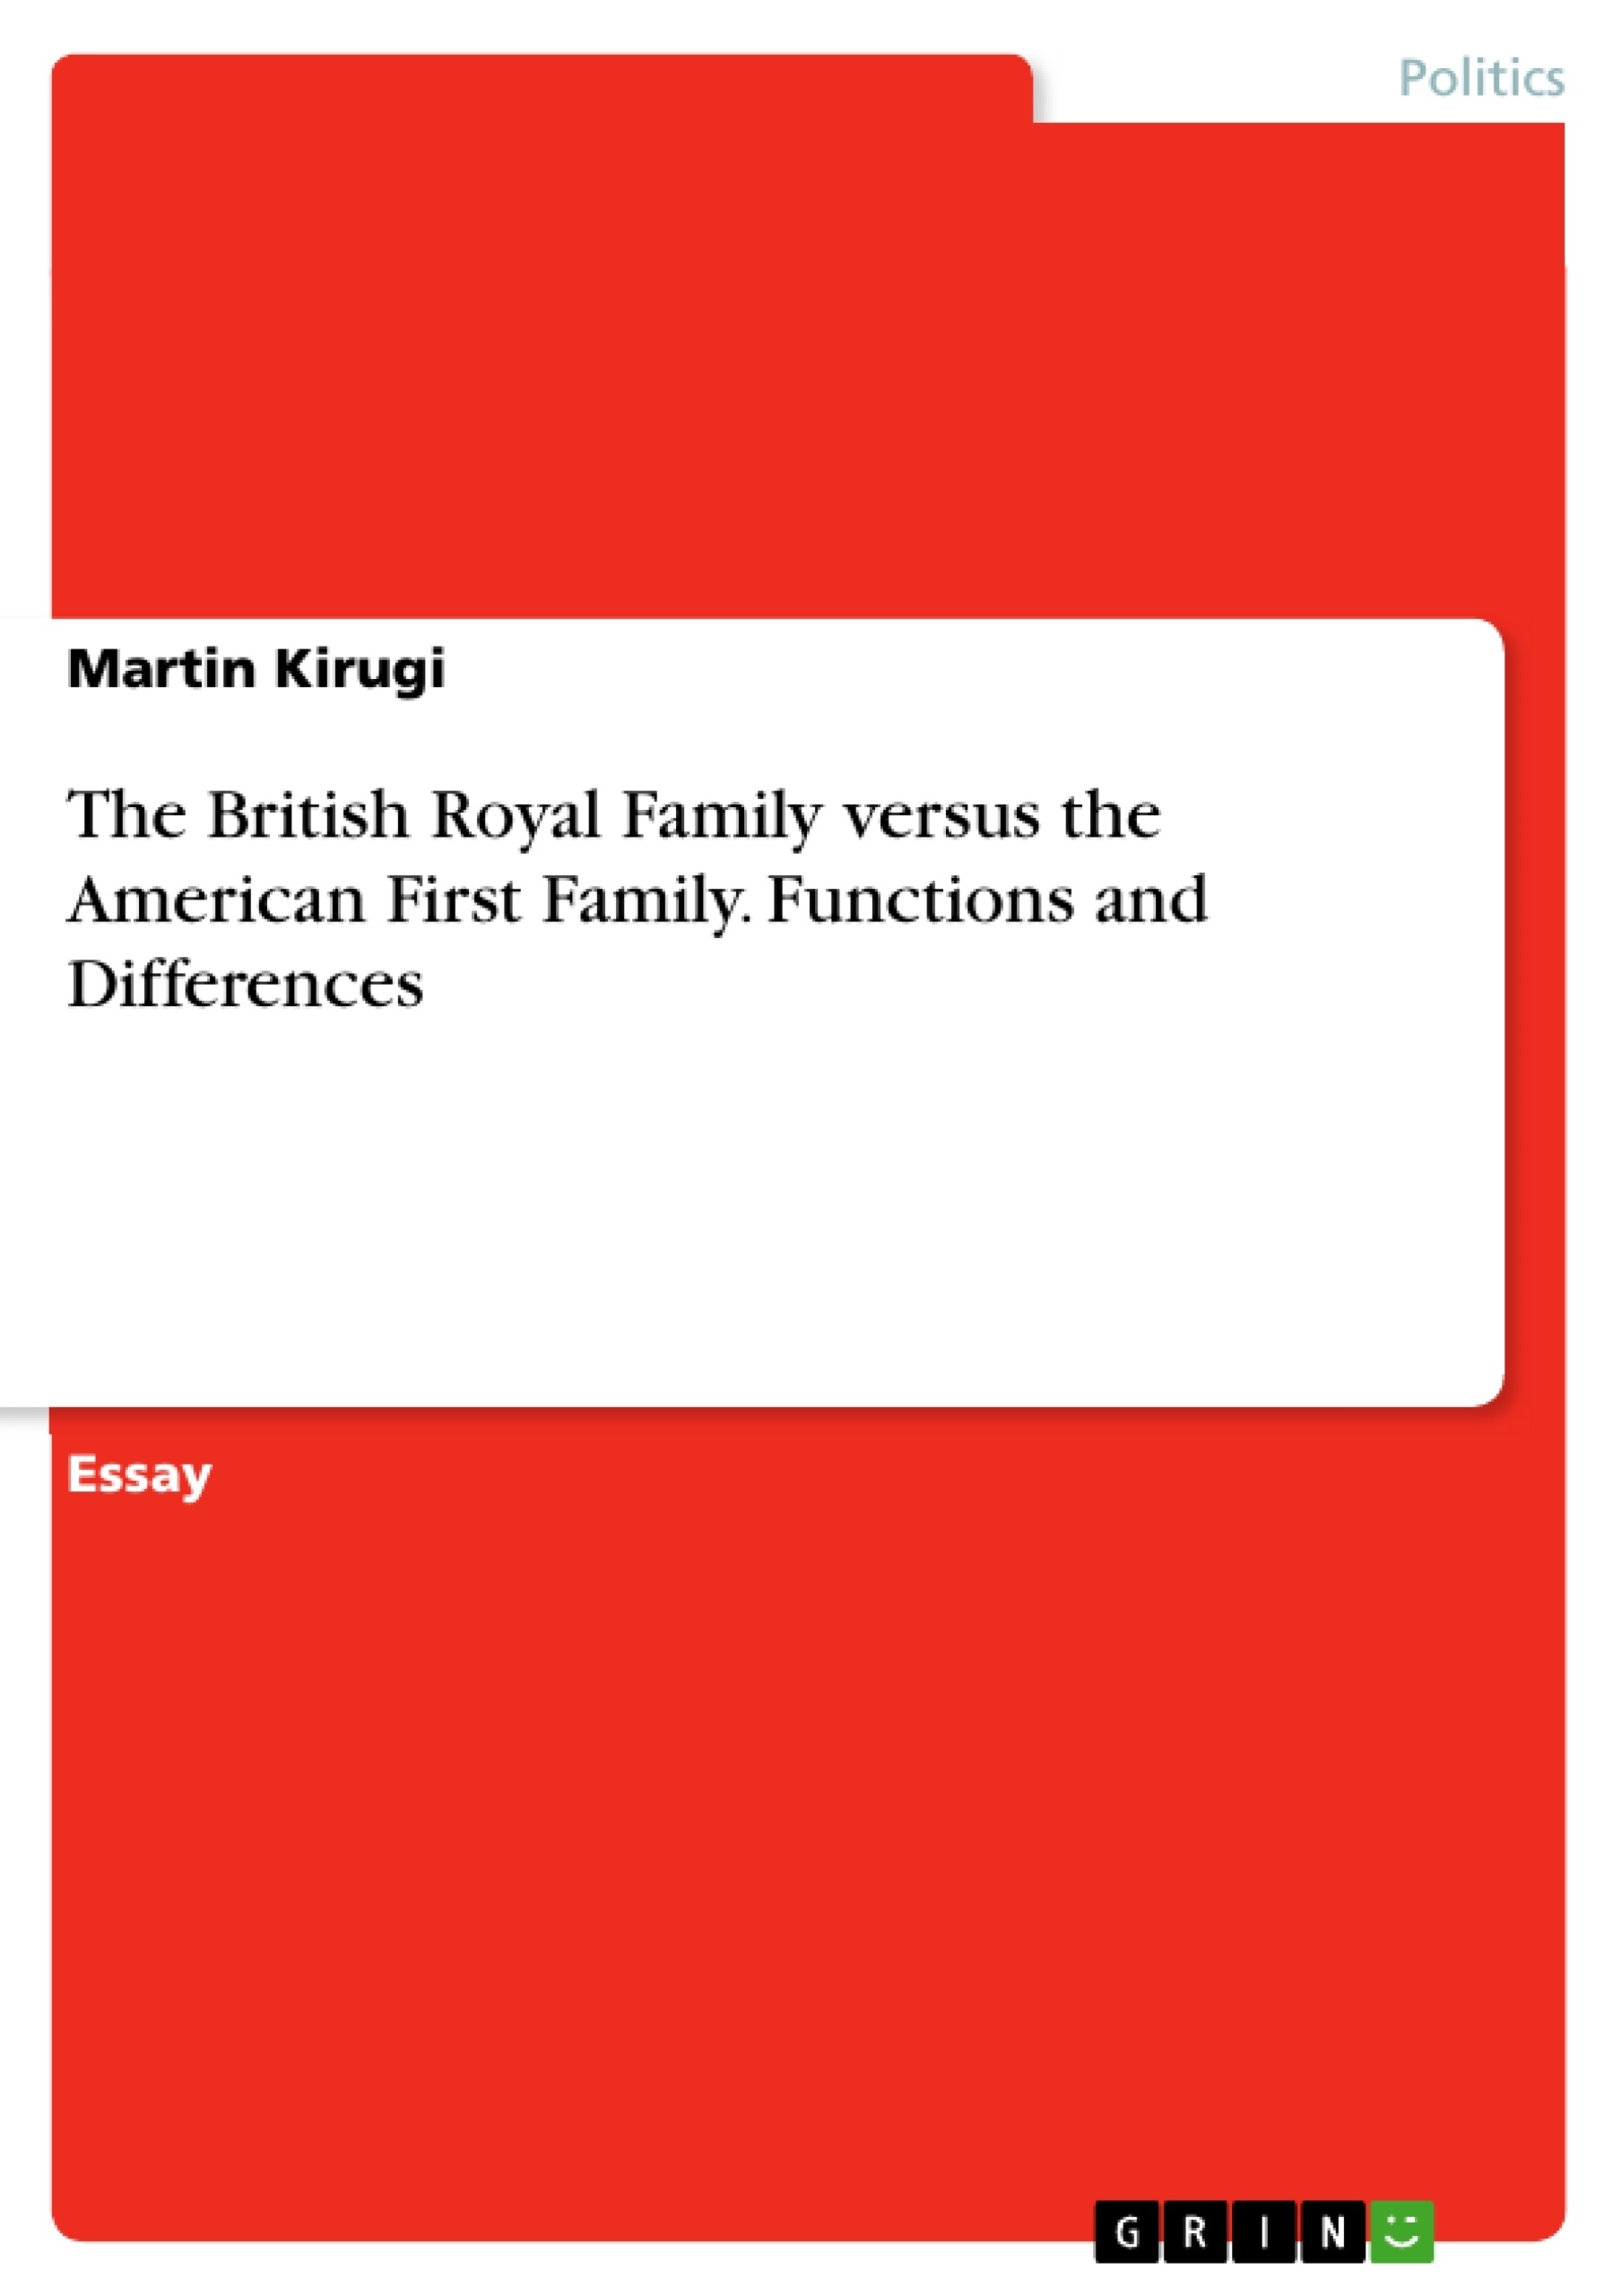 Título: The British Royal Family versus the American First Family. Functions and Differences